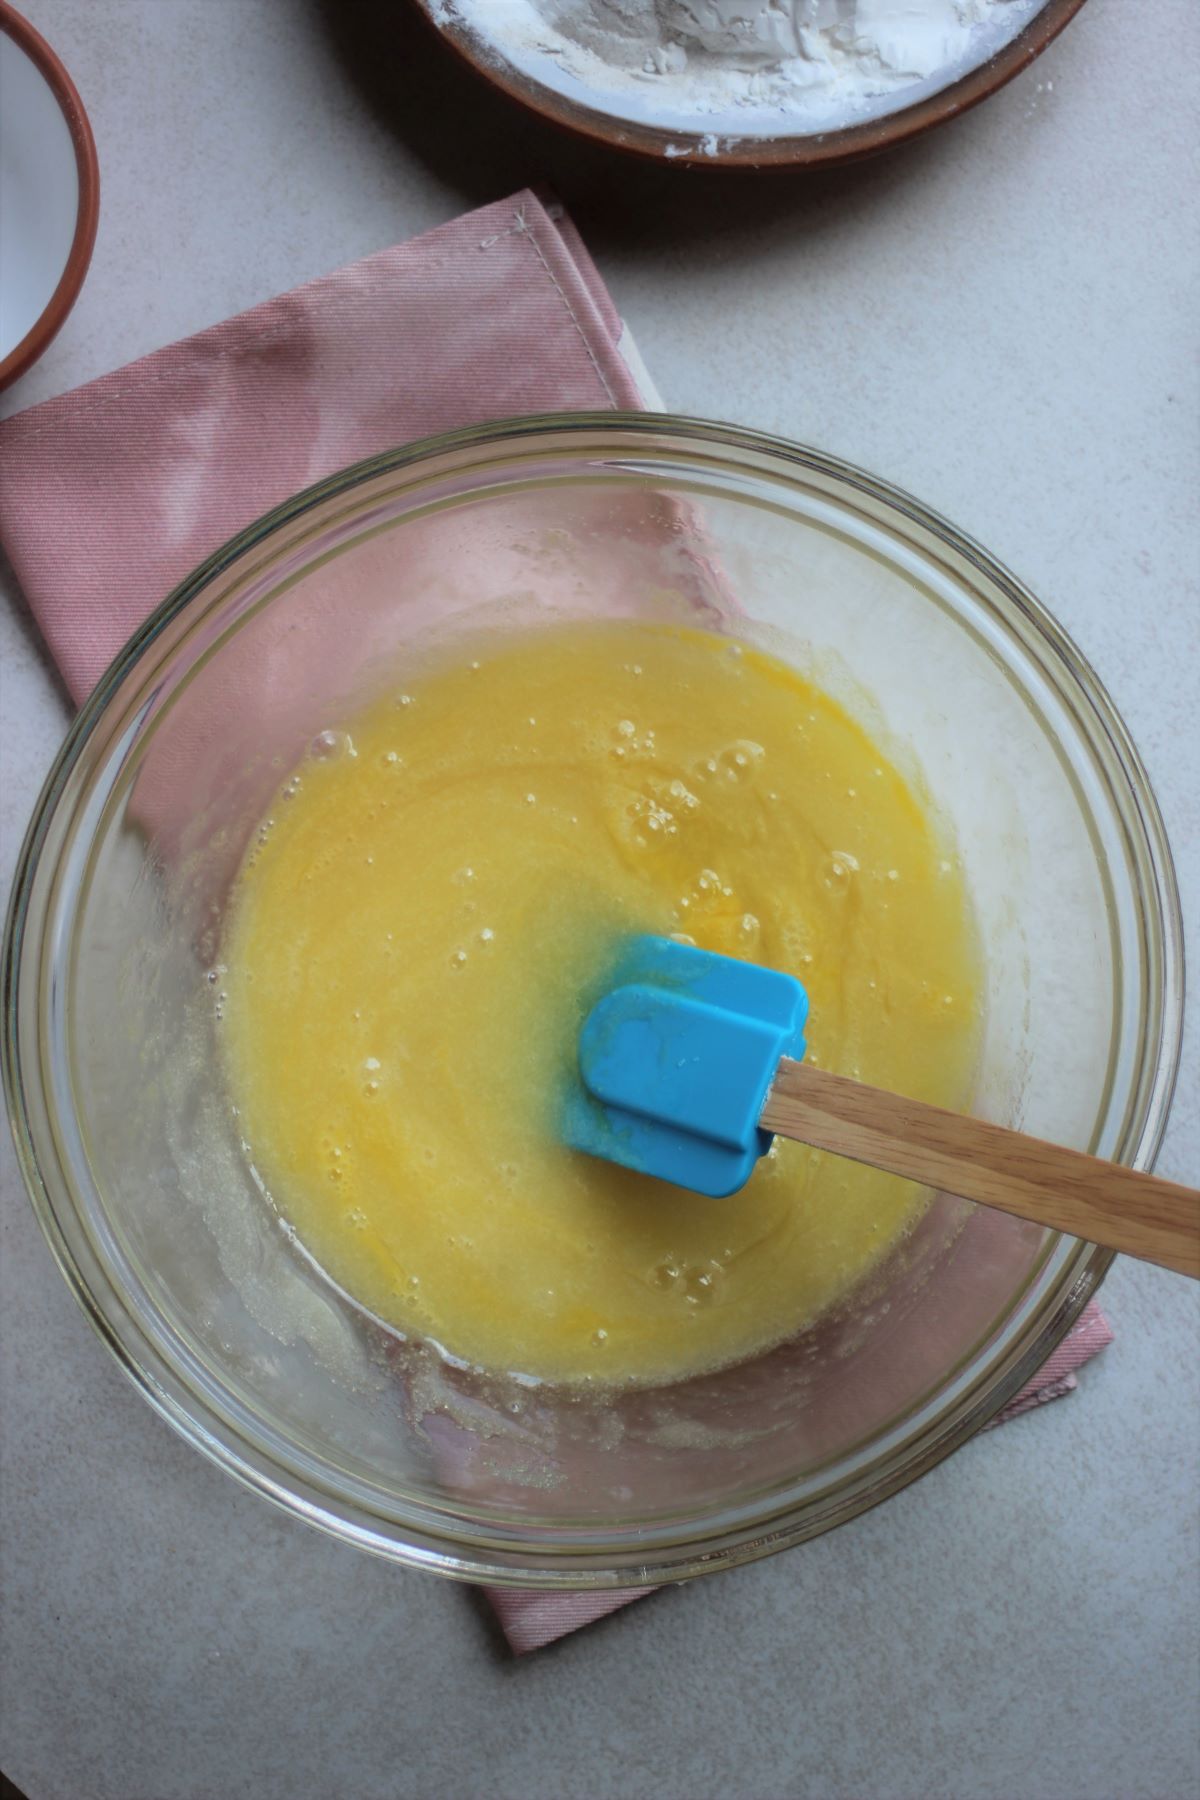 Glass bowl with a yellow mixture and a rubber spatula. Pink napkin under the bowl.